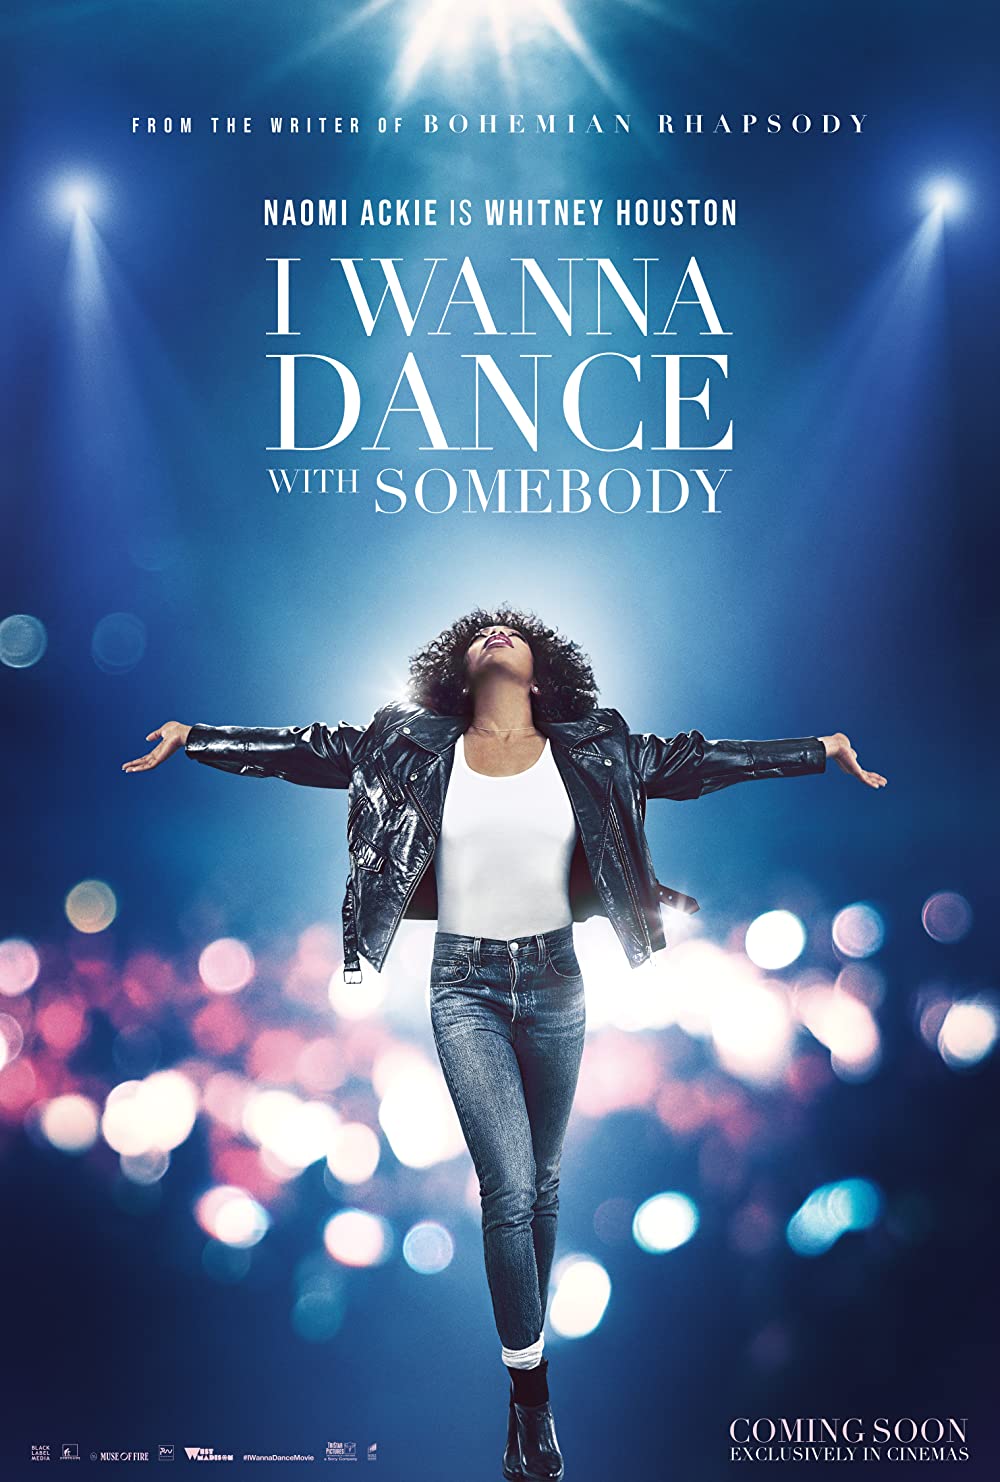 Cover Art for "Whitney Houston: I Wanna Dance with Somebody"